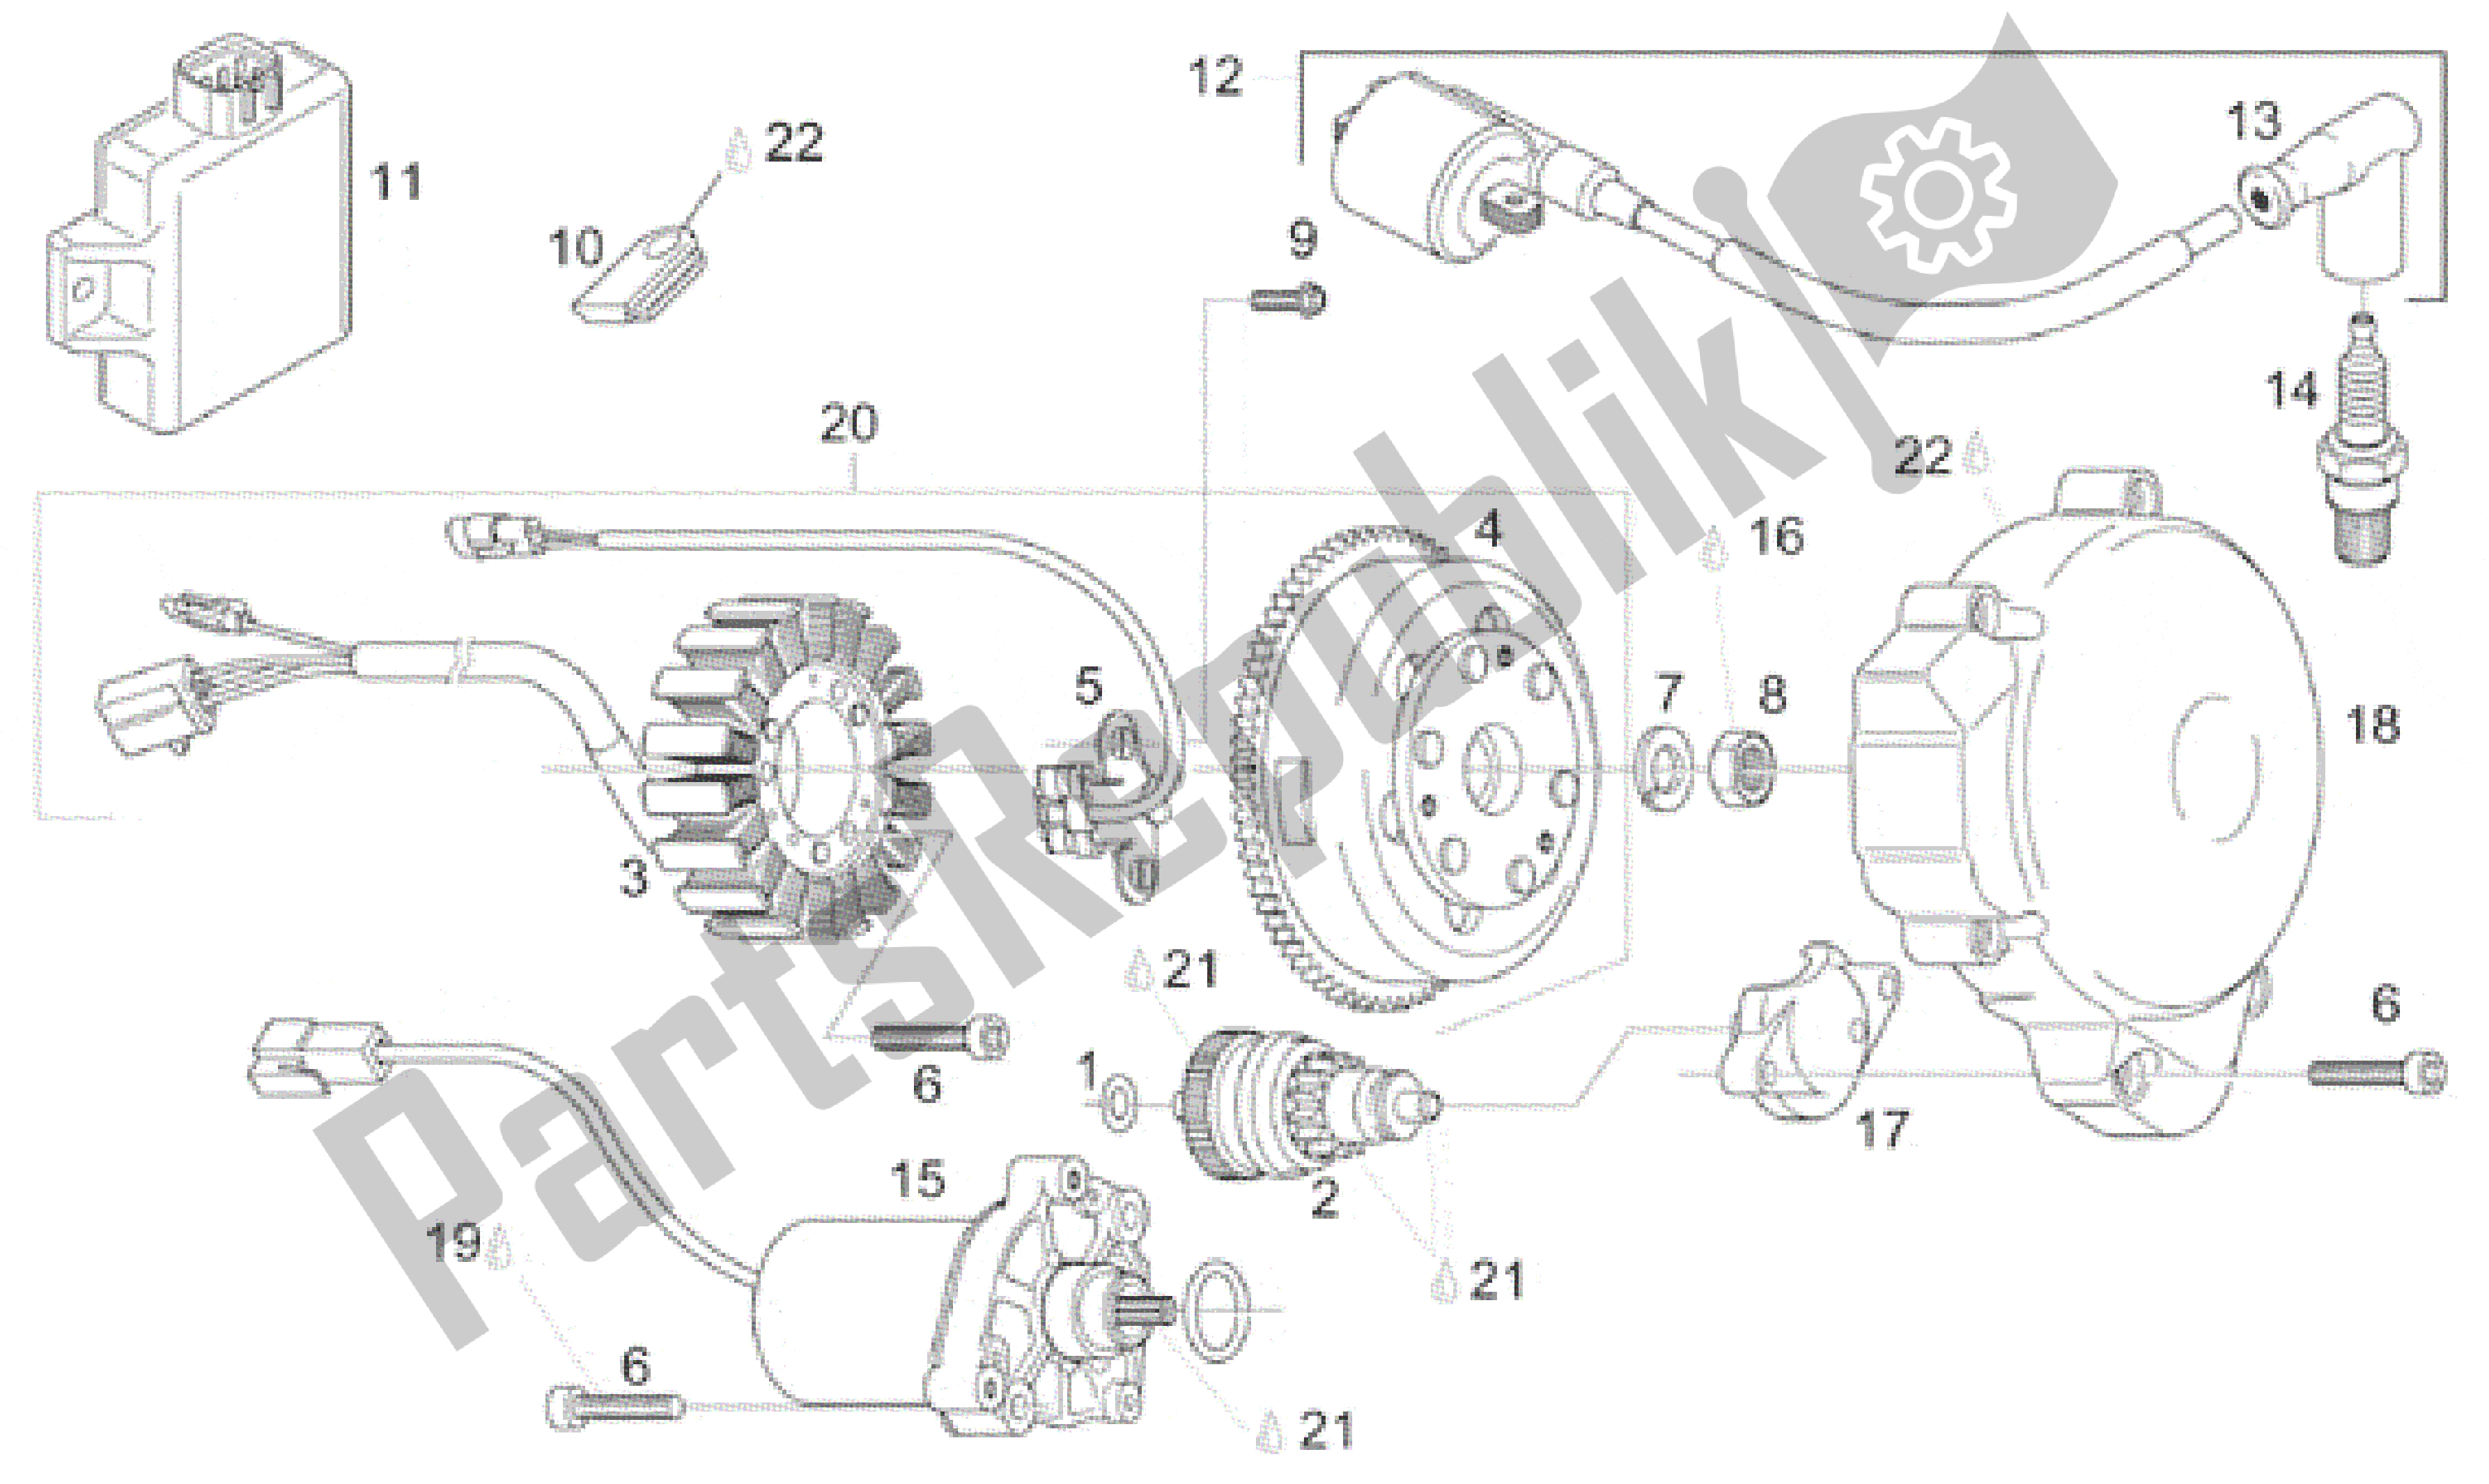 All parts for the Ignition Unit of the Aprilia Rotax 122 125 1995 - 1999